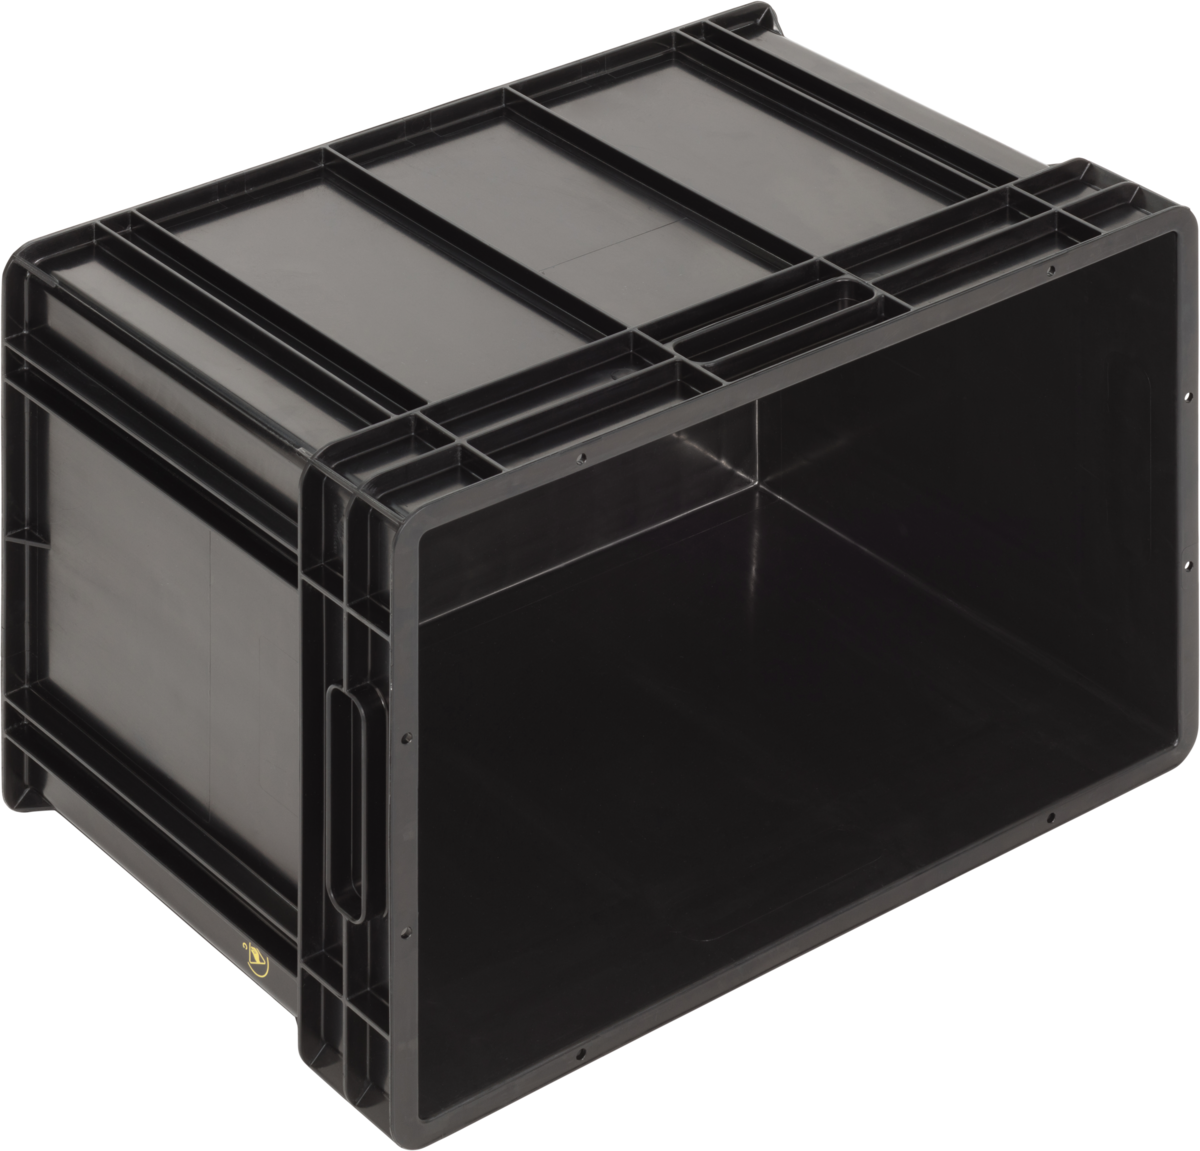 ESD-Safe-SGL-Norm-Stacking-Bin-Containers-Ribbed-Base-626-Ref.-6440.626.992_0_600x400x415_03